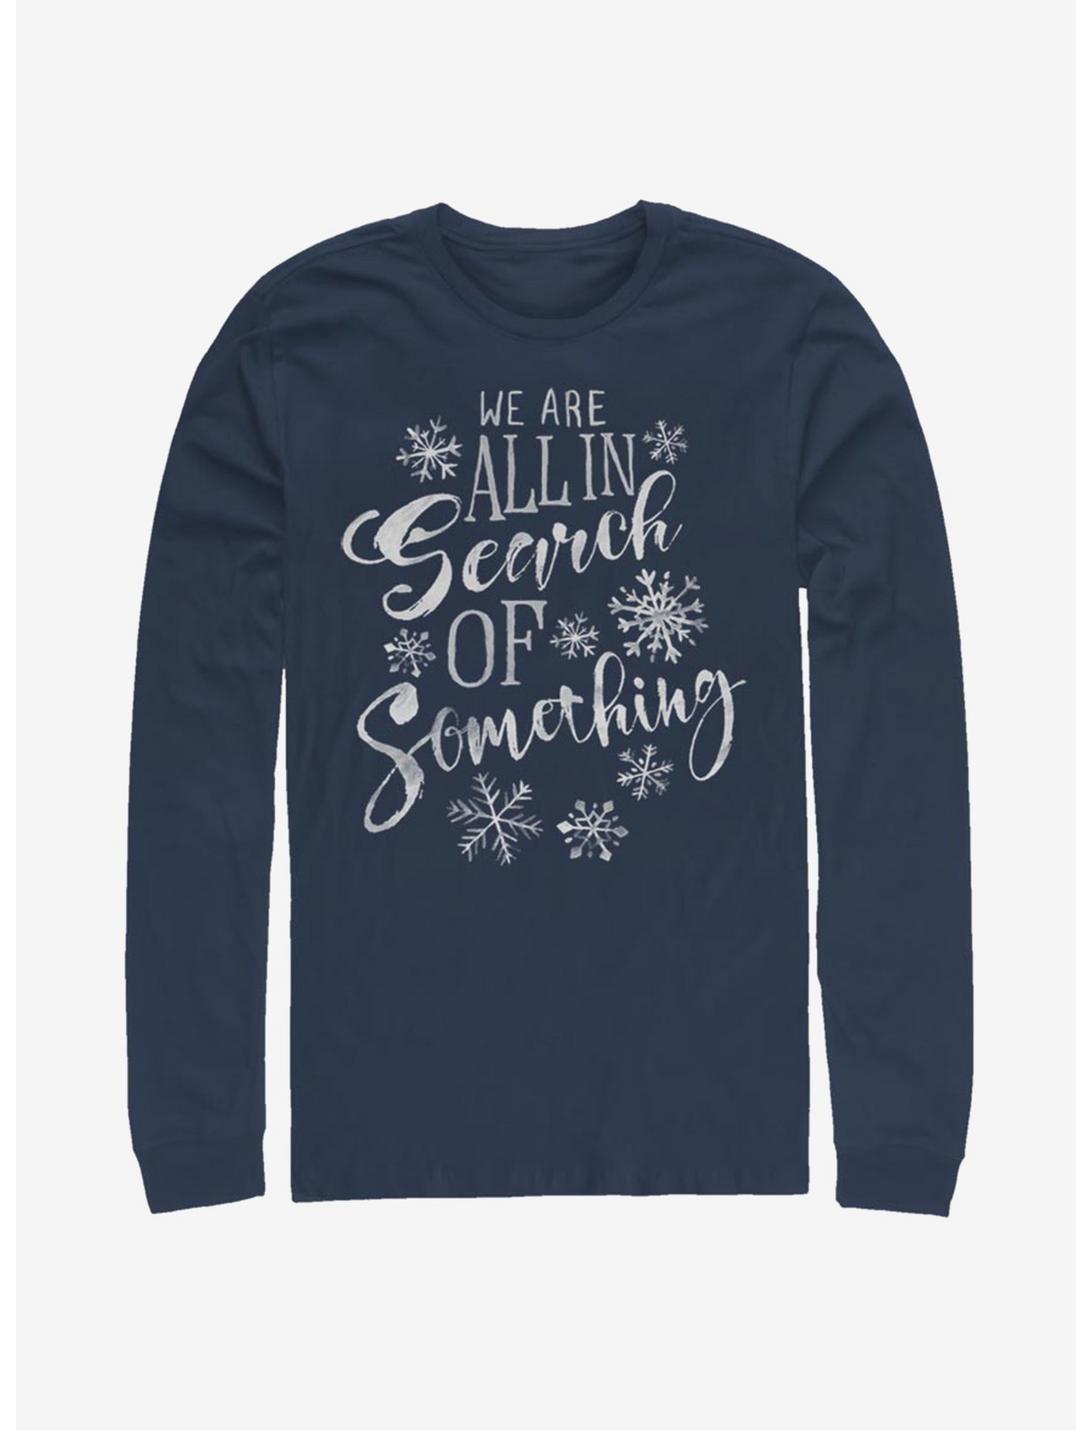 Disney Frozen 2 In Search Of Something Long-Sleeve T-Shirt, NAVY, hi-res